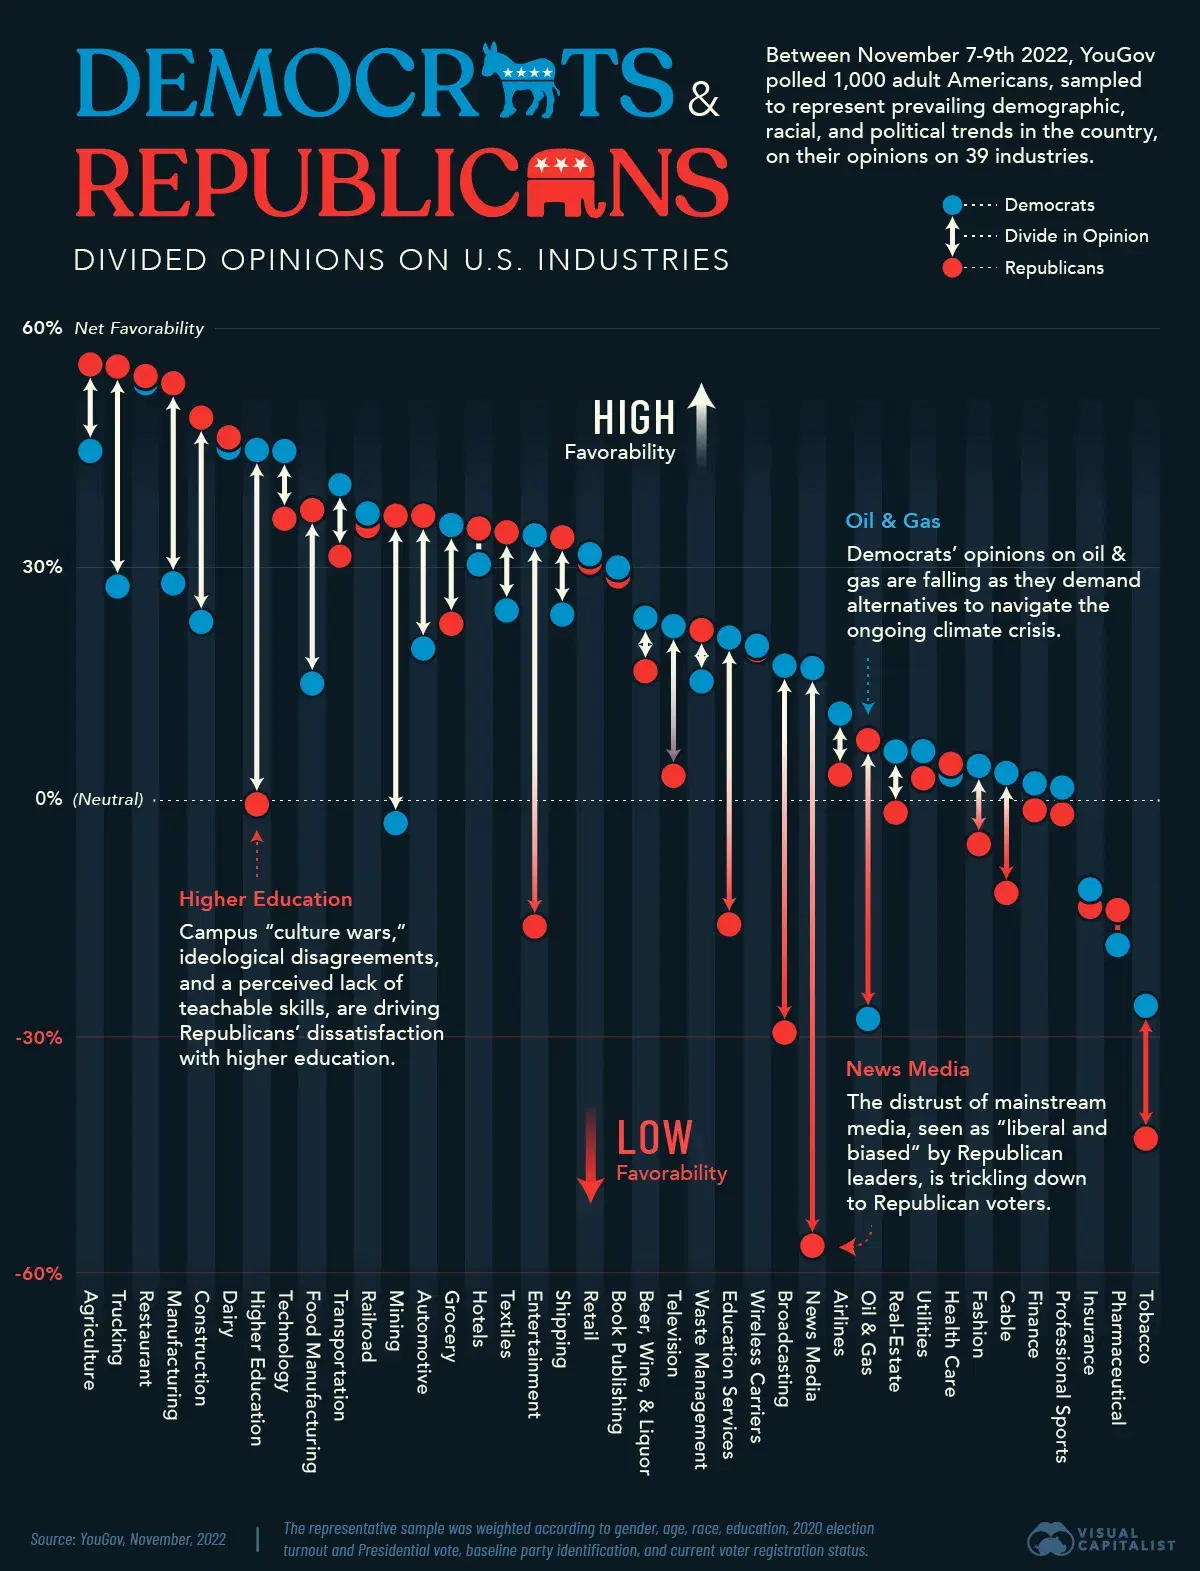 How Do Democrats and Republicans Feel About Certain U.S. Industries?